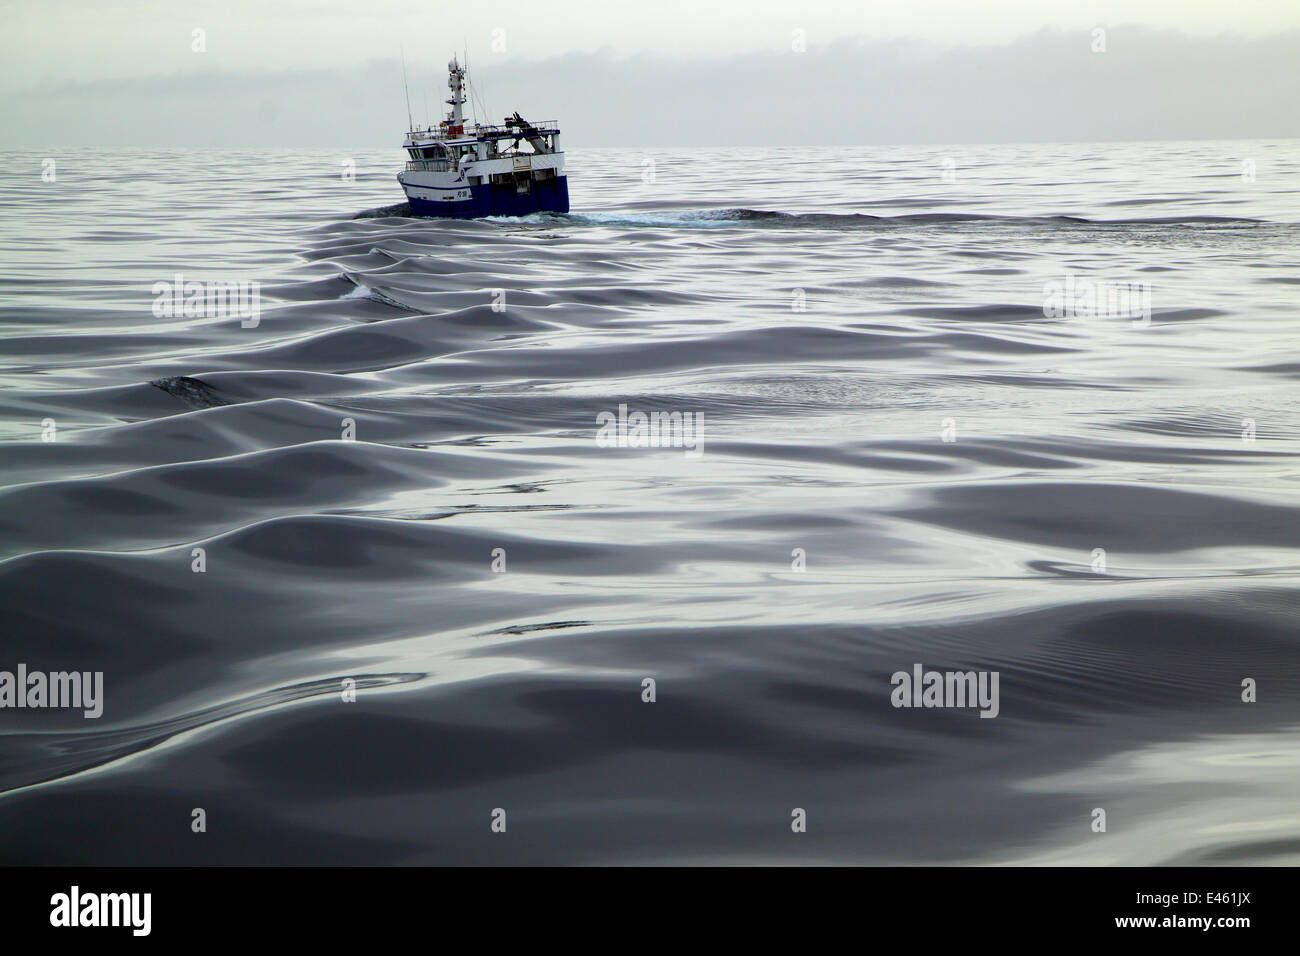 Trawler heading for fishing grounds on a calm day on the North Sea, Europe, April 2011. Property released. Stock Photo